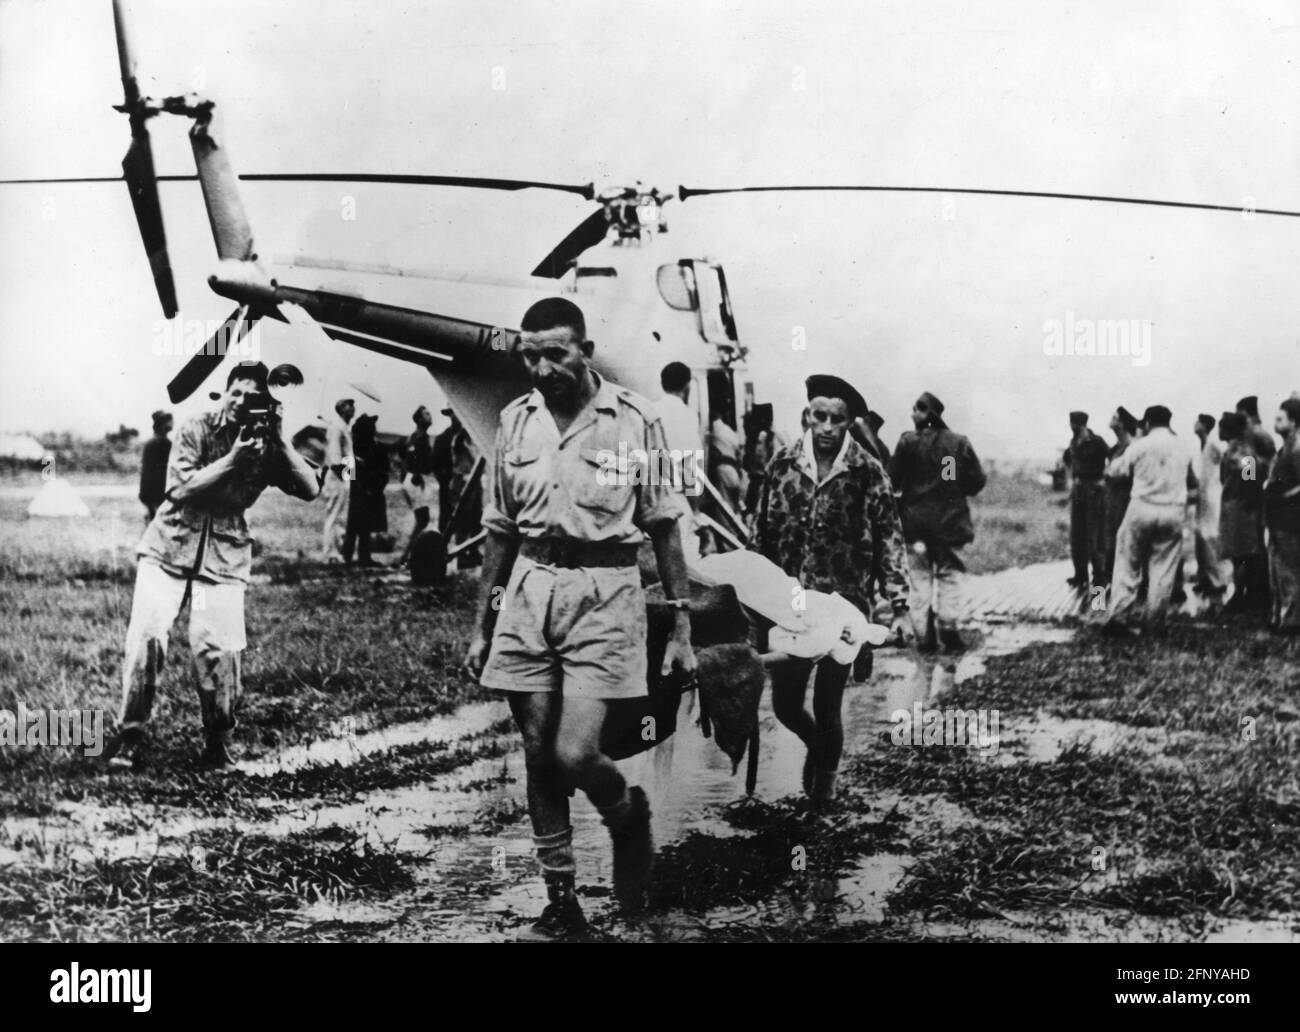 events, Indochina War 1946 - 1954, evacuation of the wundews from Dien Bien Phu, 20.5.1954, clearance, ADDITIONAL-RIGHTS-CLEARANCE-INFO-NOT-AVAILABLE Stock Photo